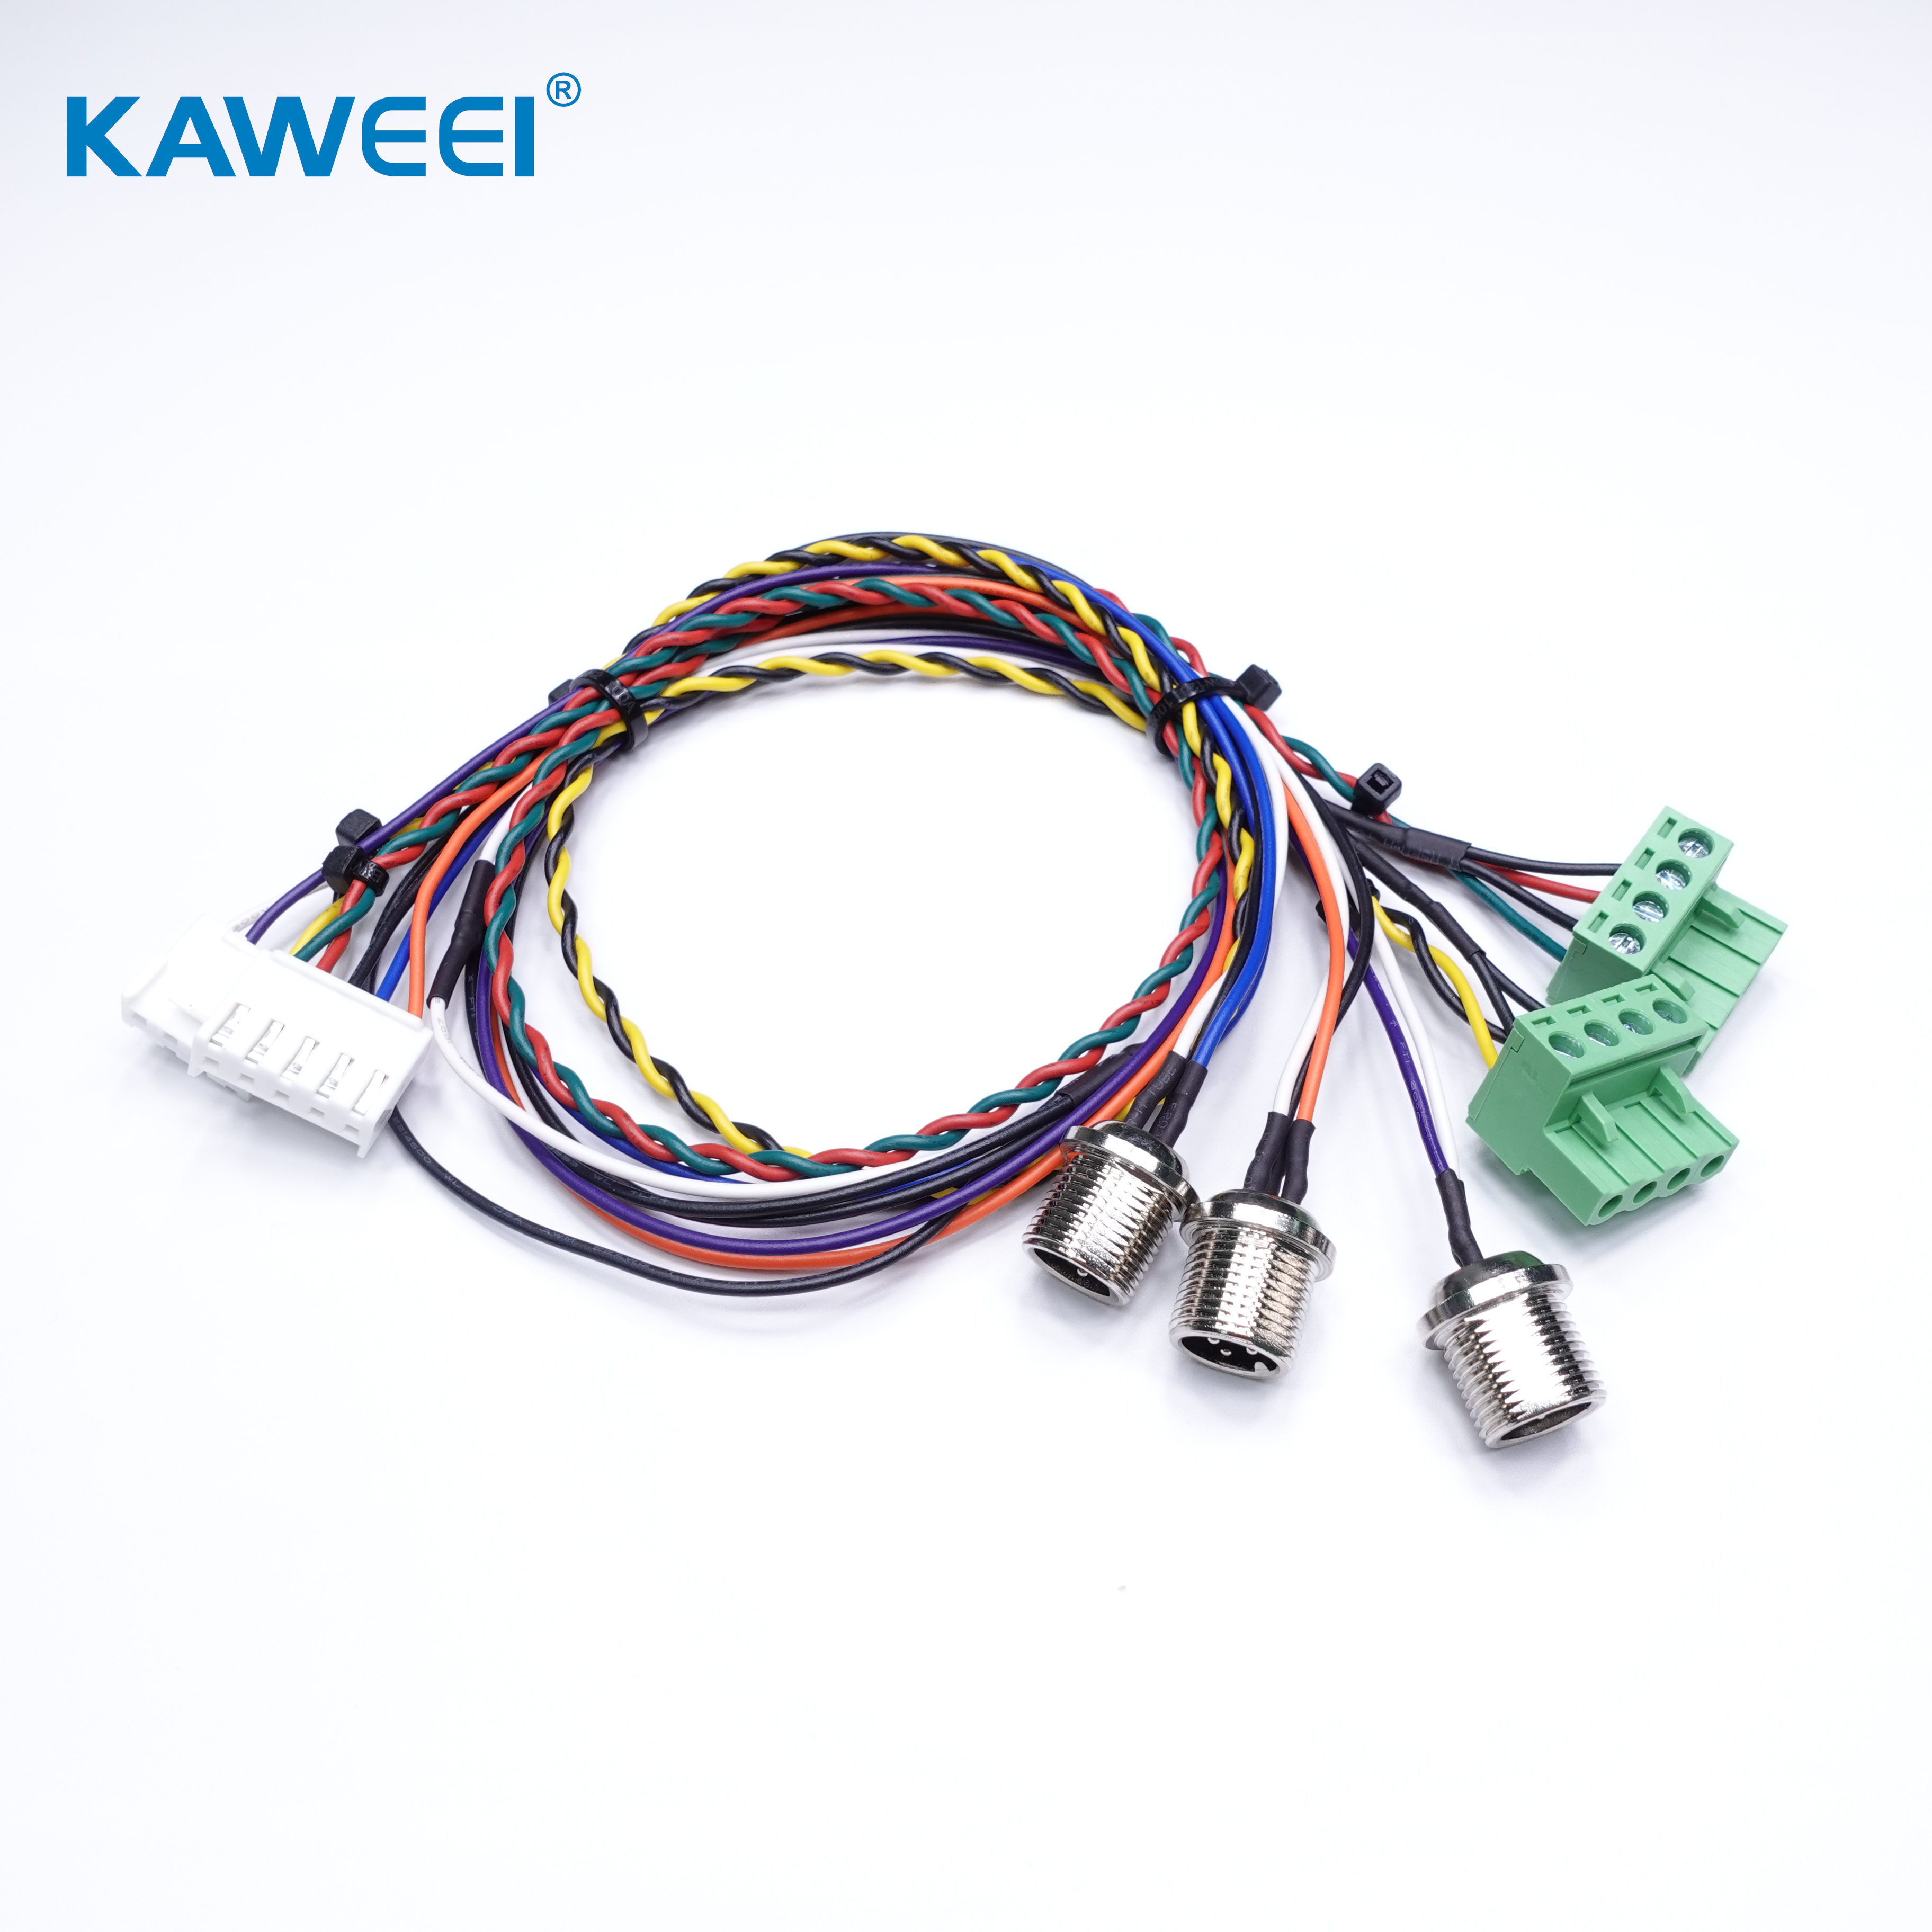 Digital Controlled Lathe Wire Harness Customized digital controlled lathe Cable Industrial equipment wire harness